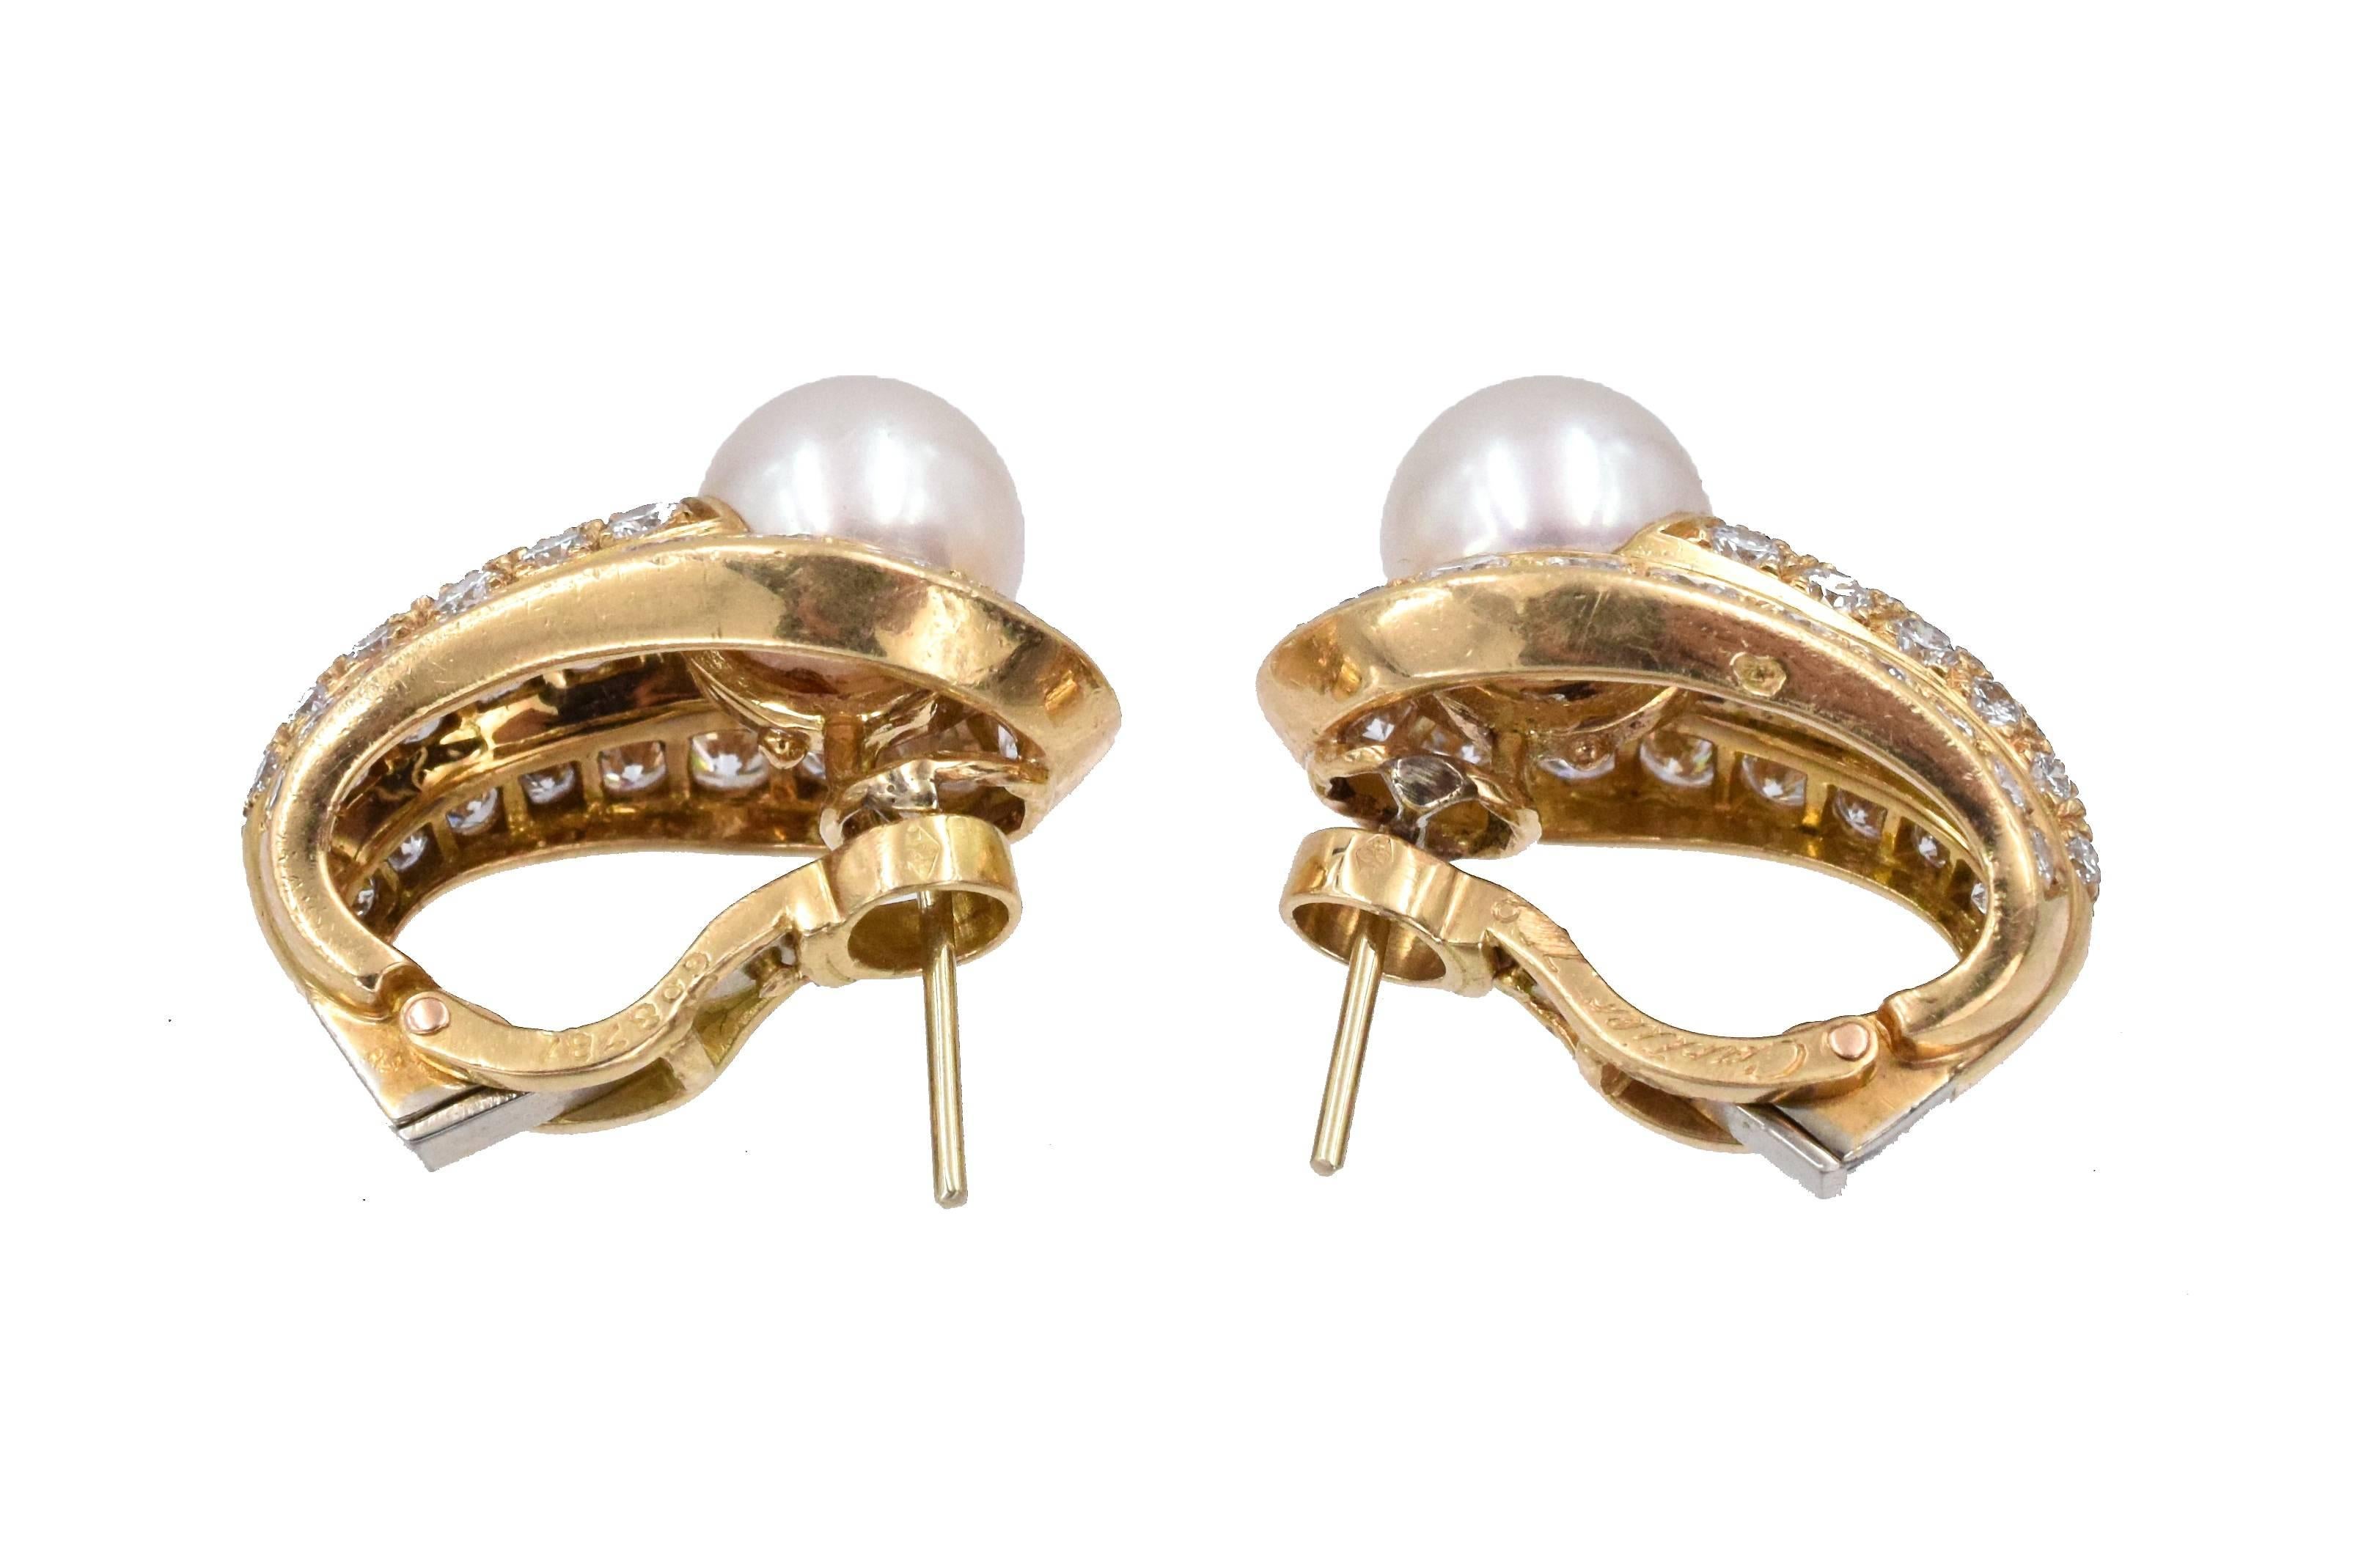 Cartier, France.
Pair of Gold, Cultured Pearl and Diamond Earrings, 
The rounded tapered panels centering 2 pearls approximately 8.0 mm., set with 74 round diamonds approximately 3.45ct.
Measure 7/8 x 9/16 inch. Have posts & clip-backs.
 Signed